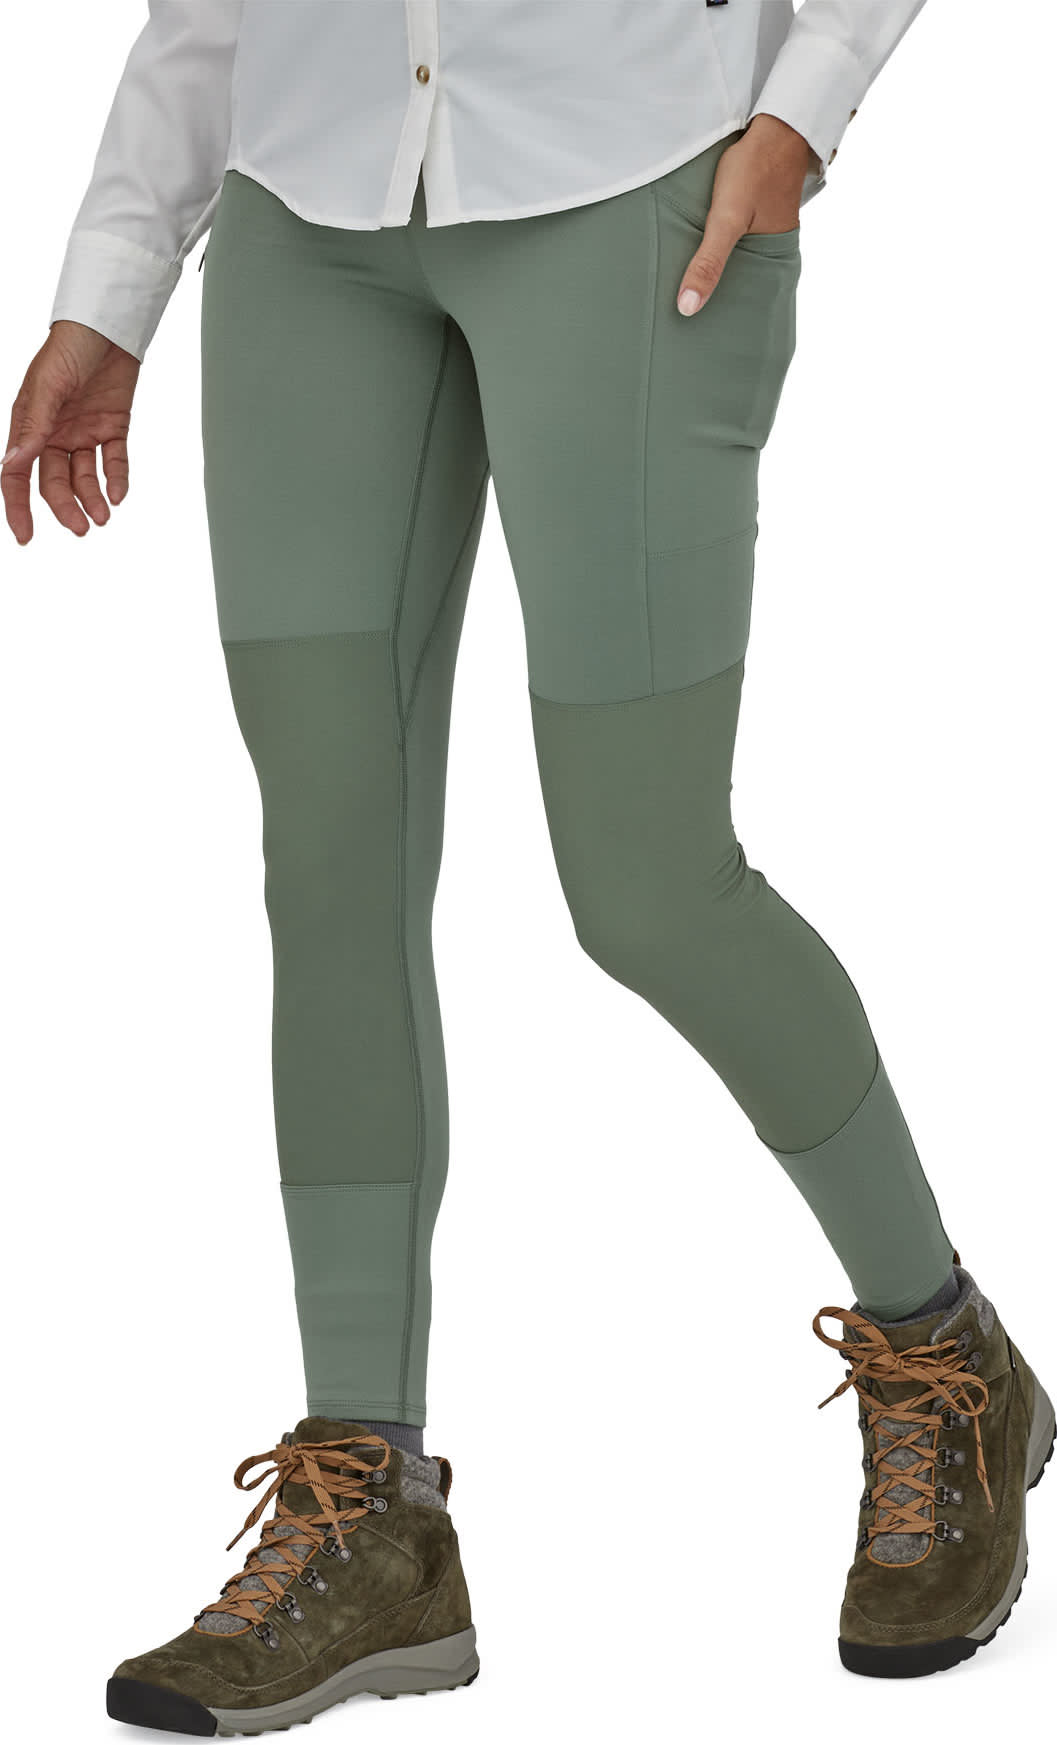 Women's Patagonia Pack Out Hike Tights